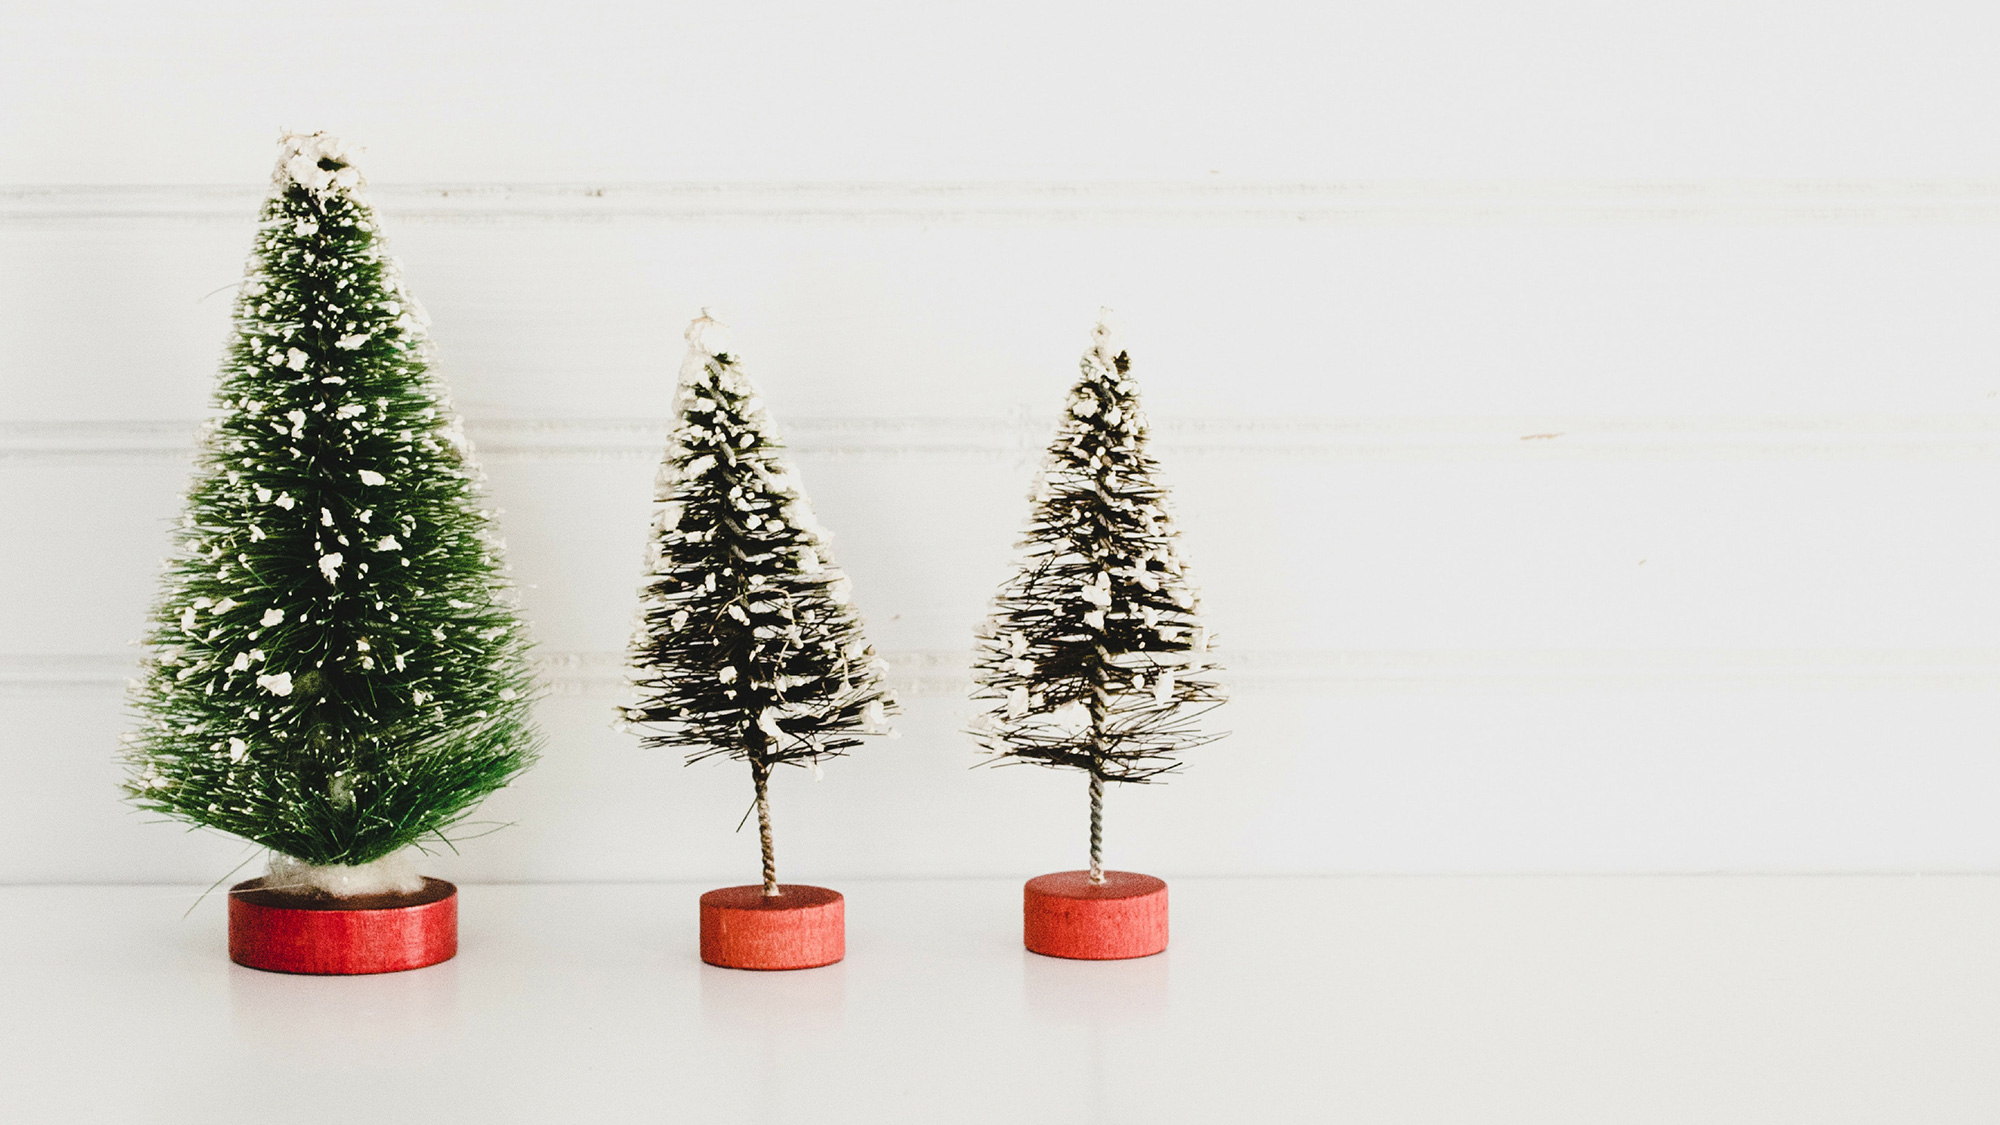 Photo of three small artificial Christmas trees